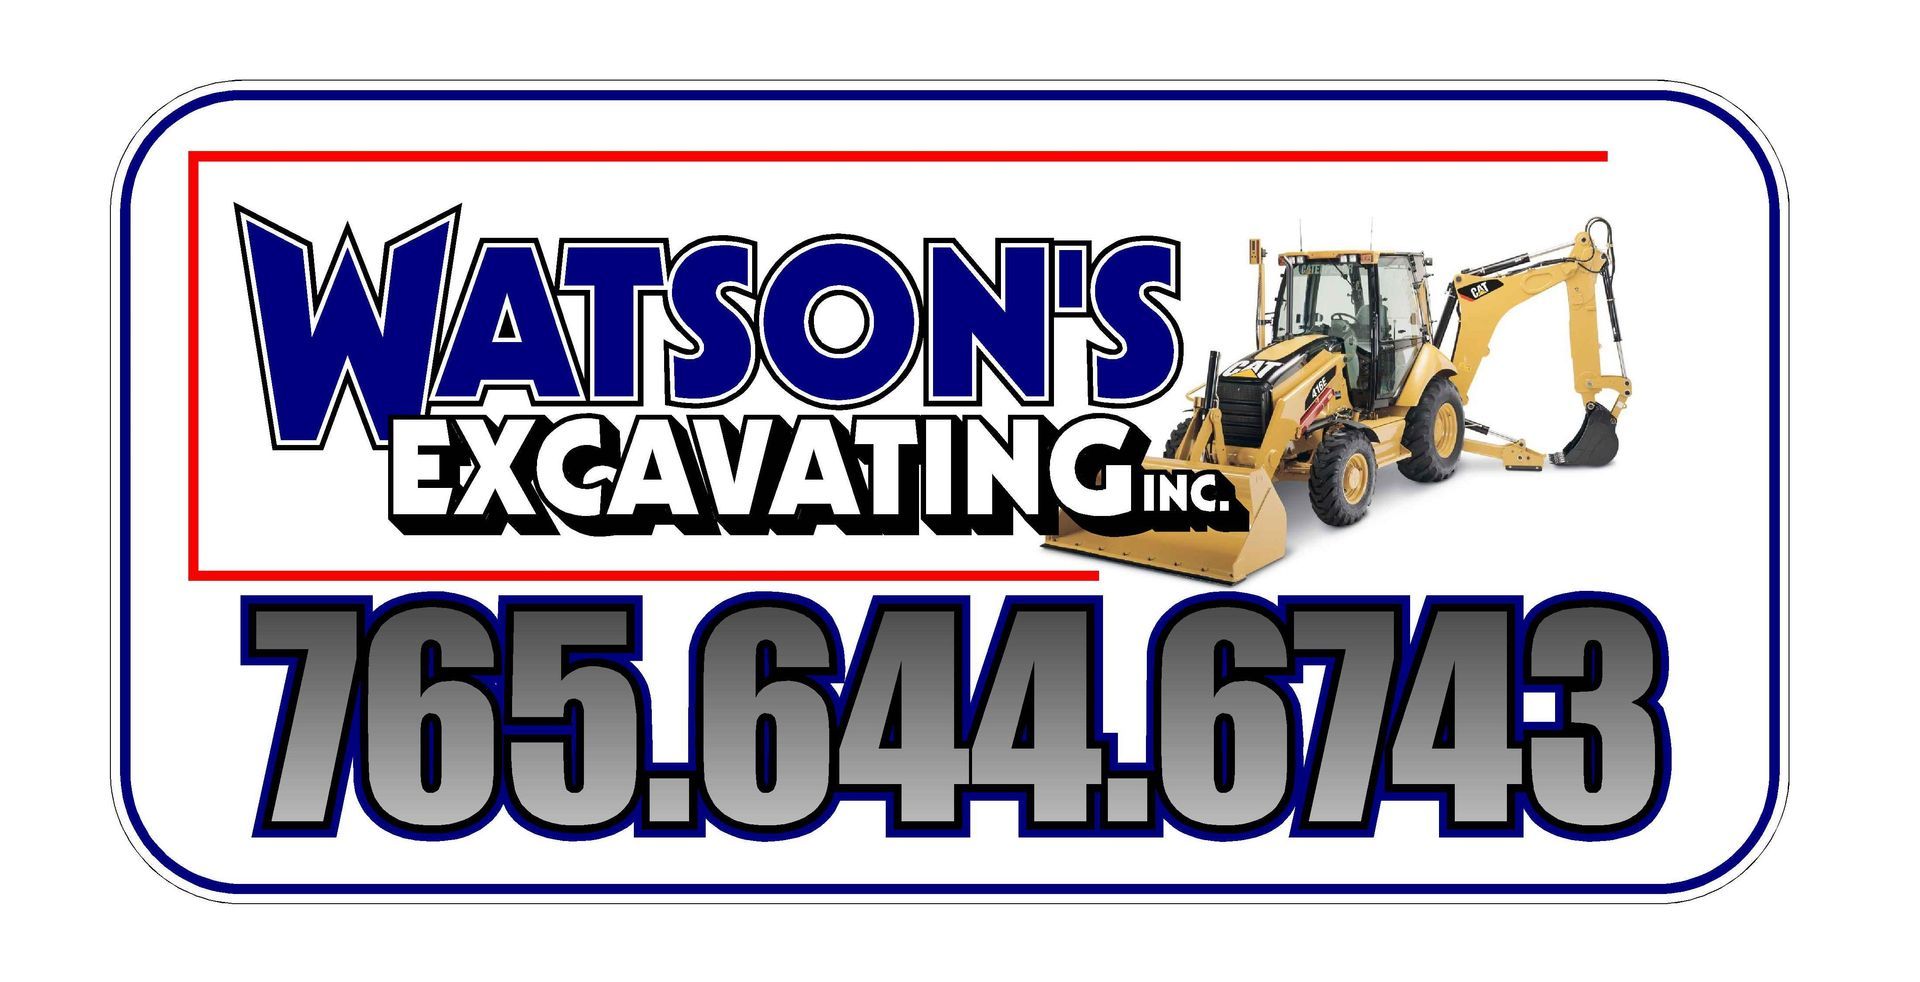 a logo for watson 's excavating inc. with a phone number | Anderson, IN | WEI